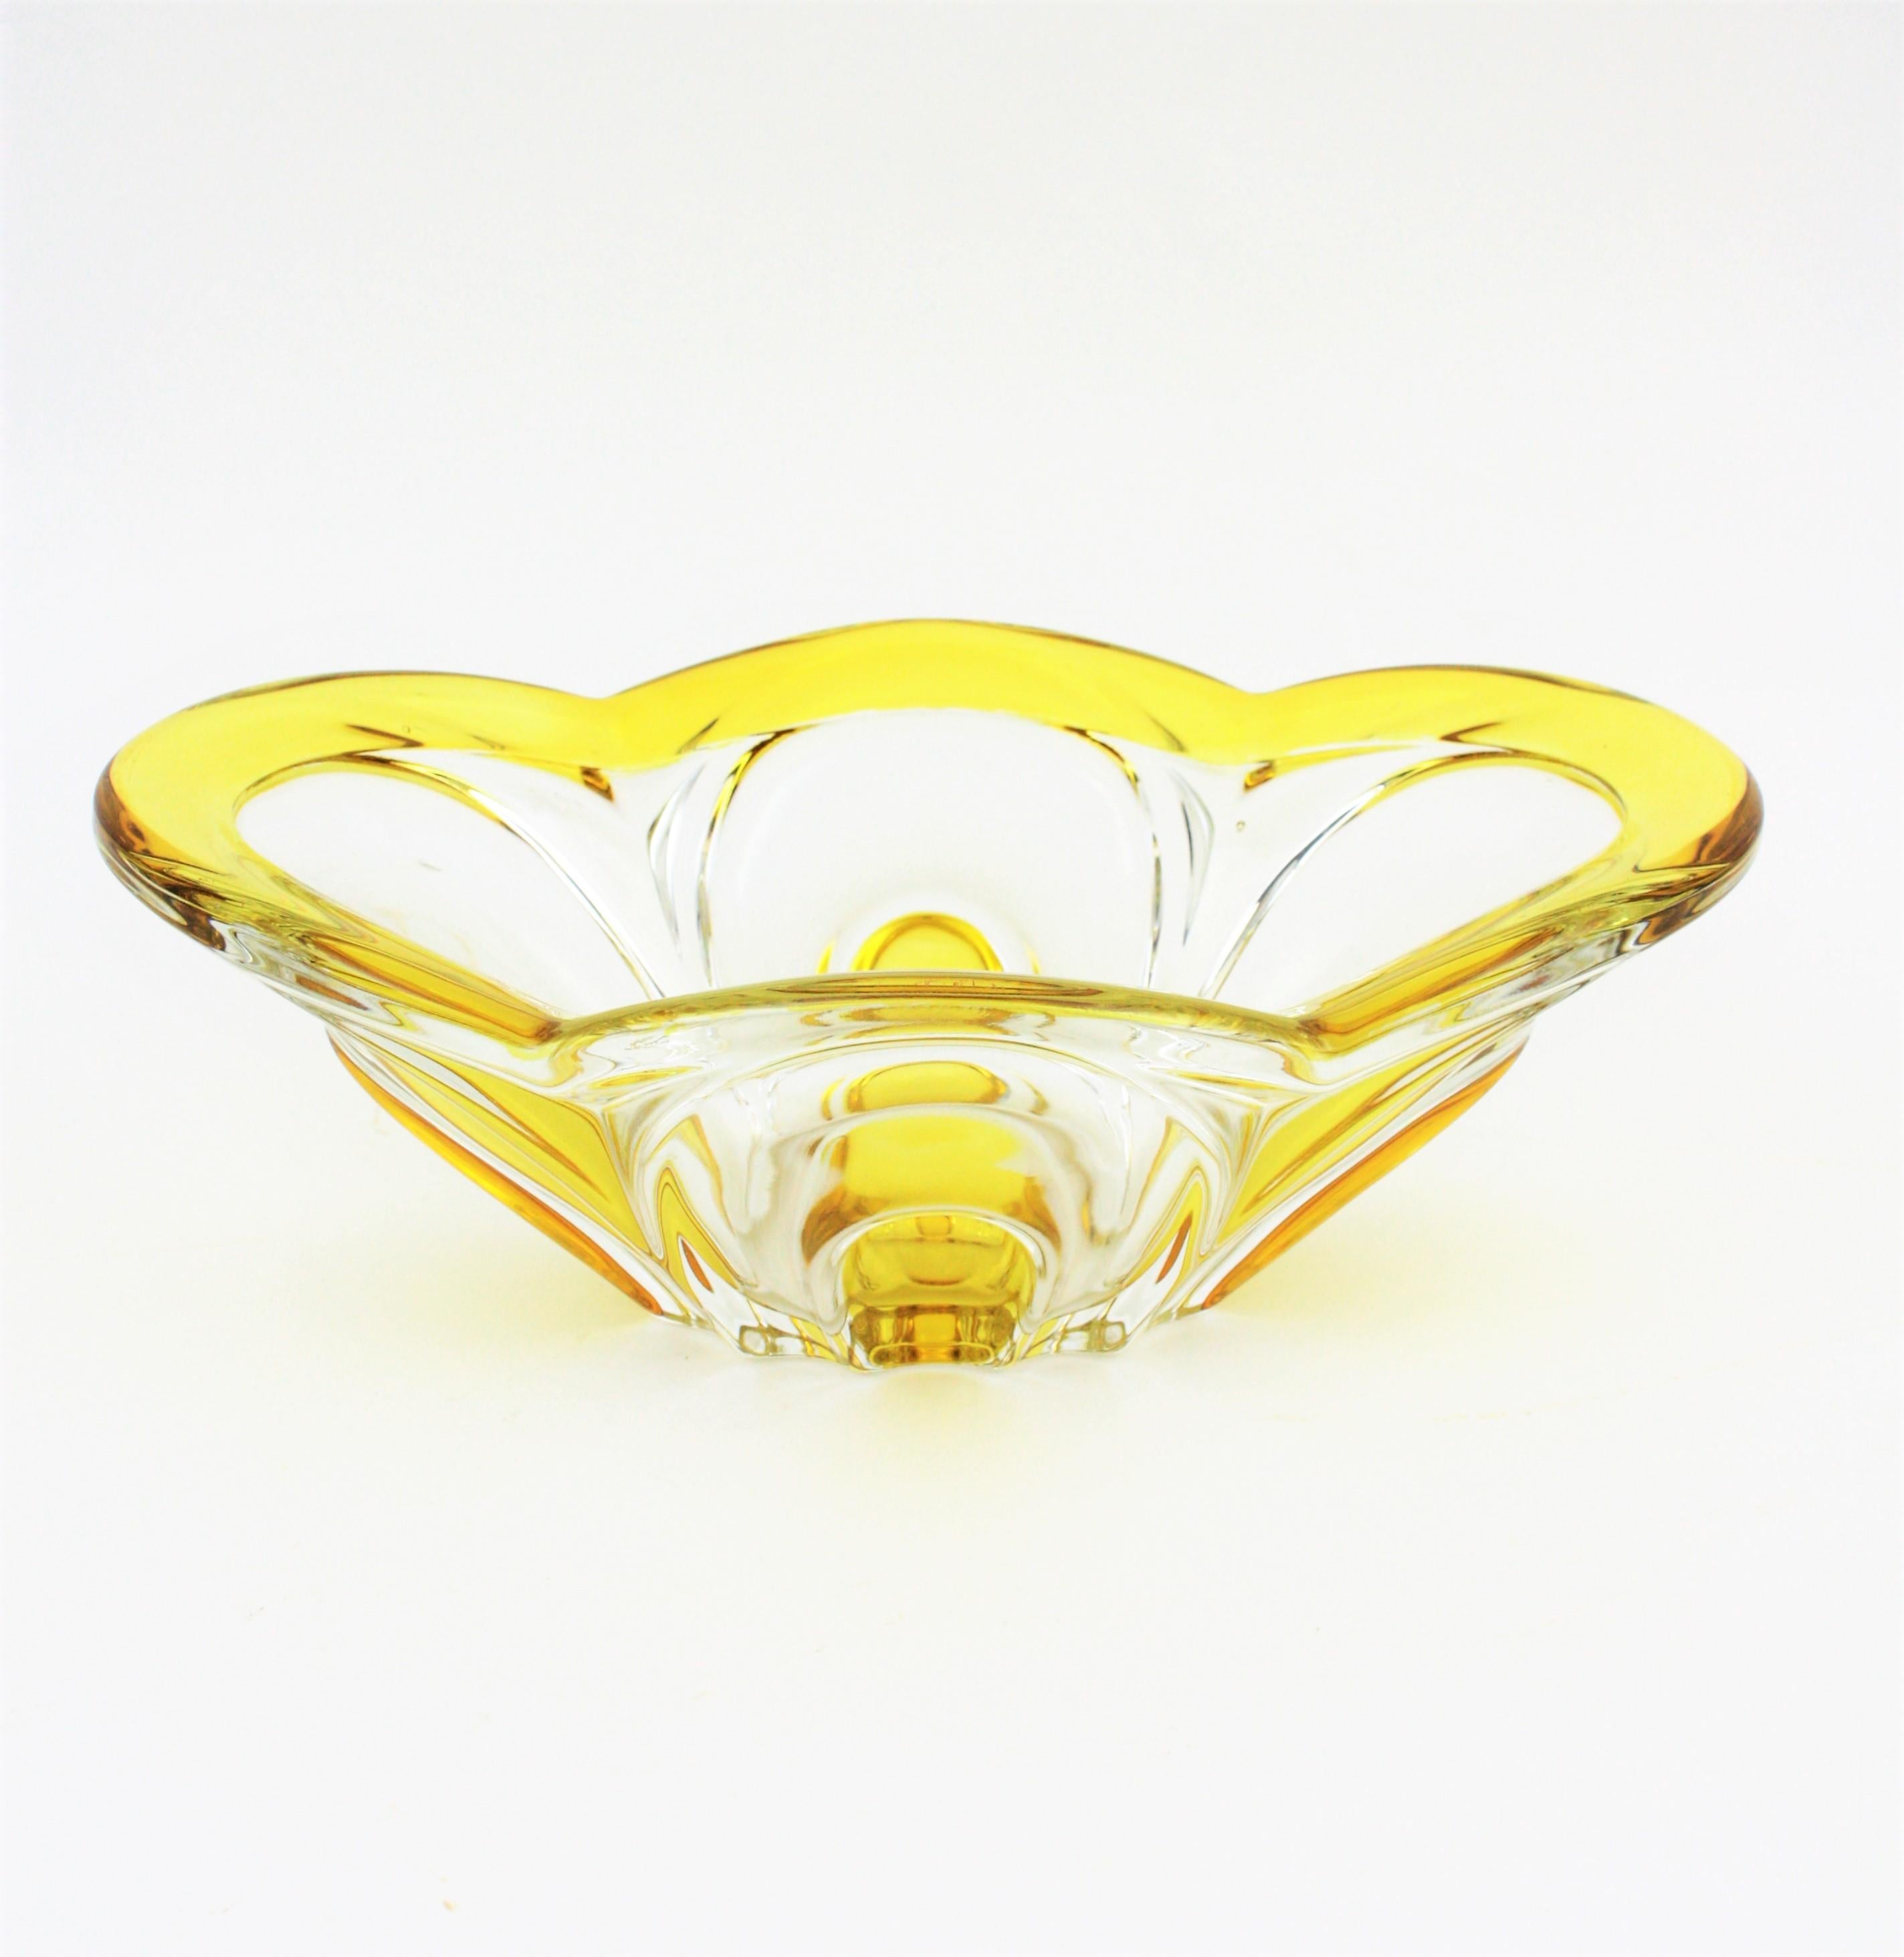 Mid-Century Modern Italian 1950s Scalloped Sommerso Yellow and Clear Murano Glass Centrepiece